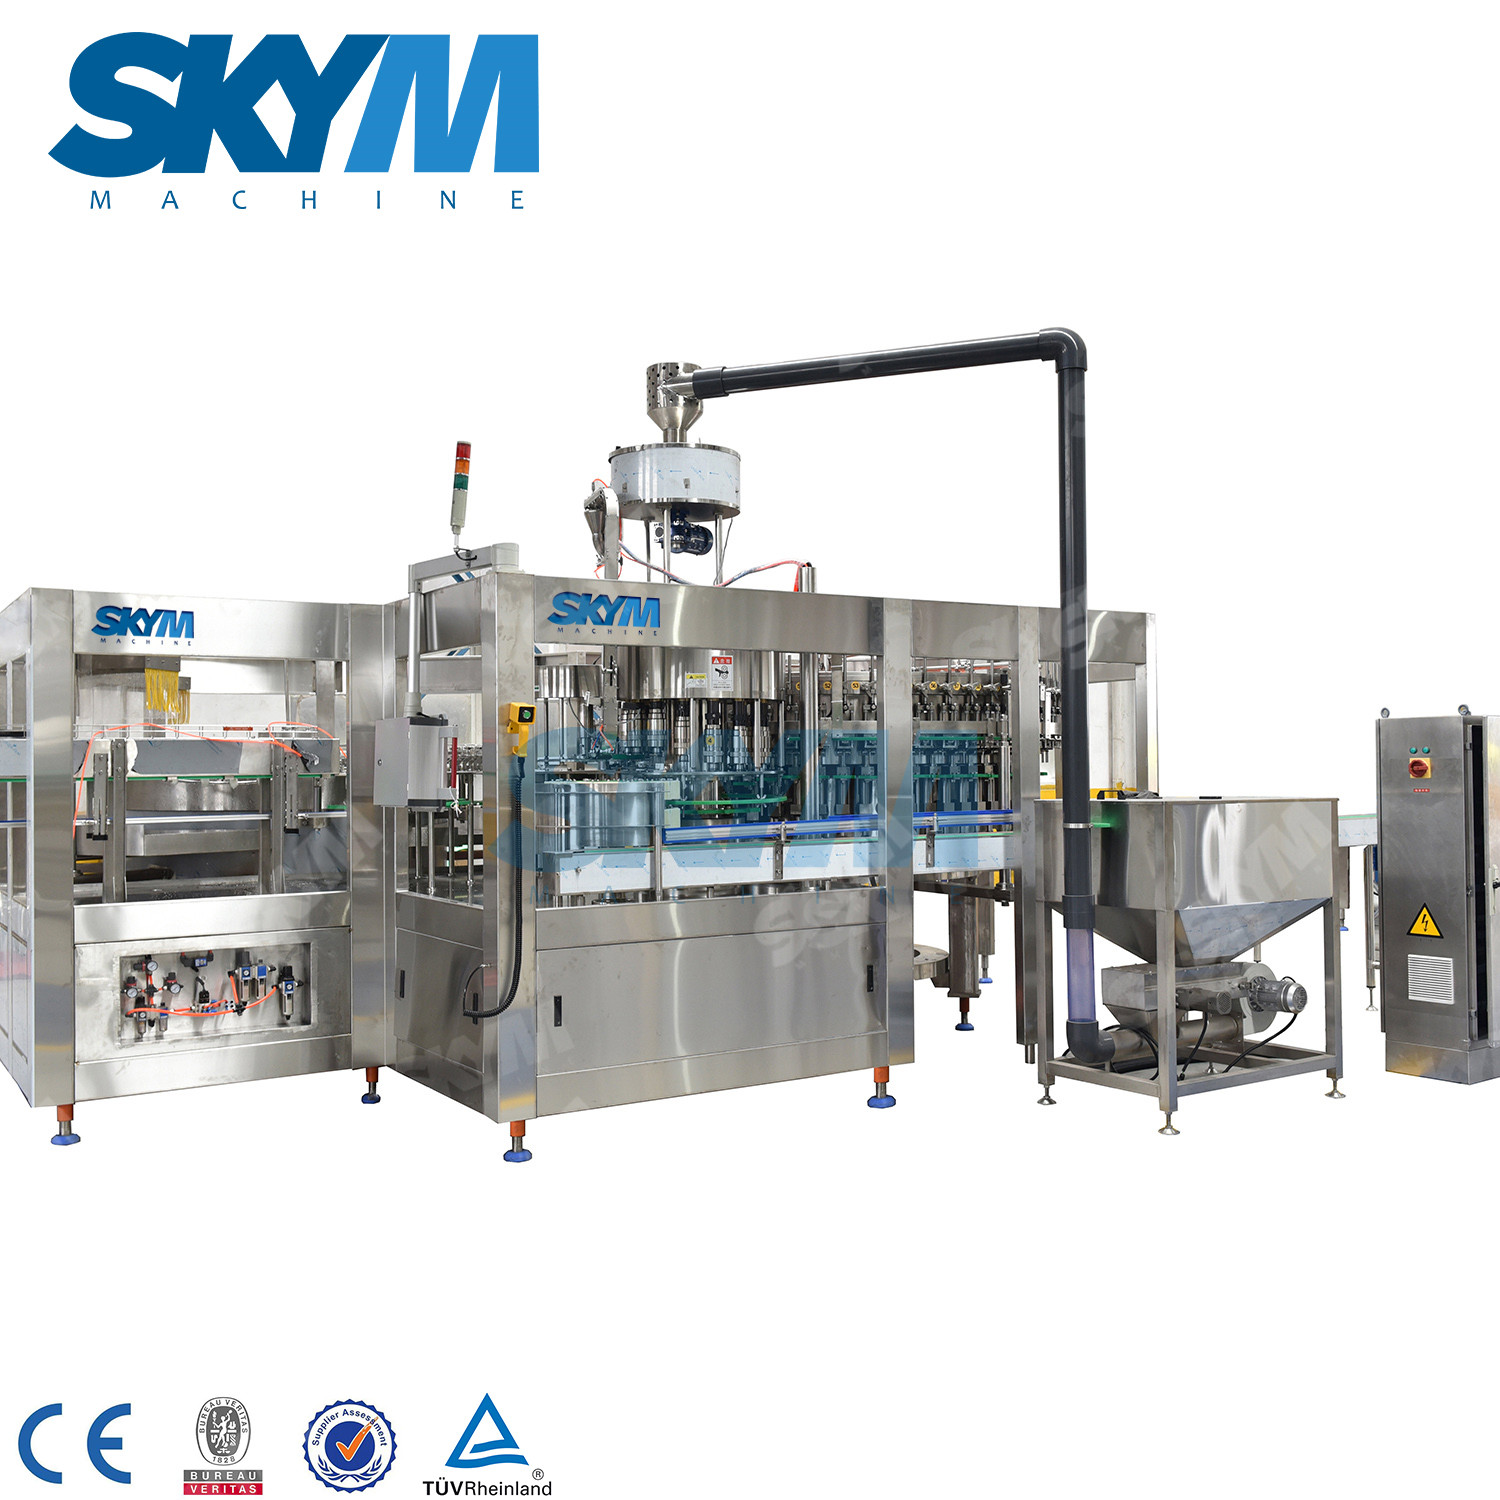 Automatic Soft Drink PET Bottle Filling Machine from China manufacturer Sky Machine